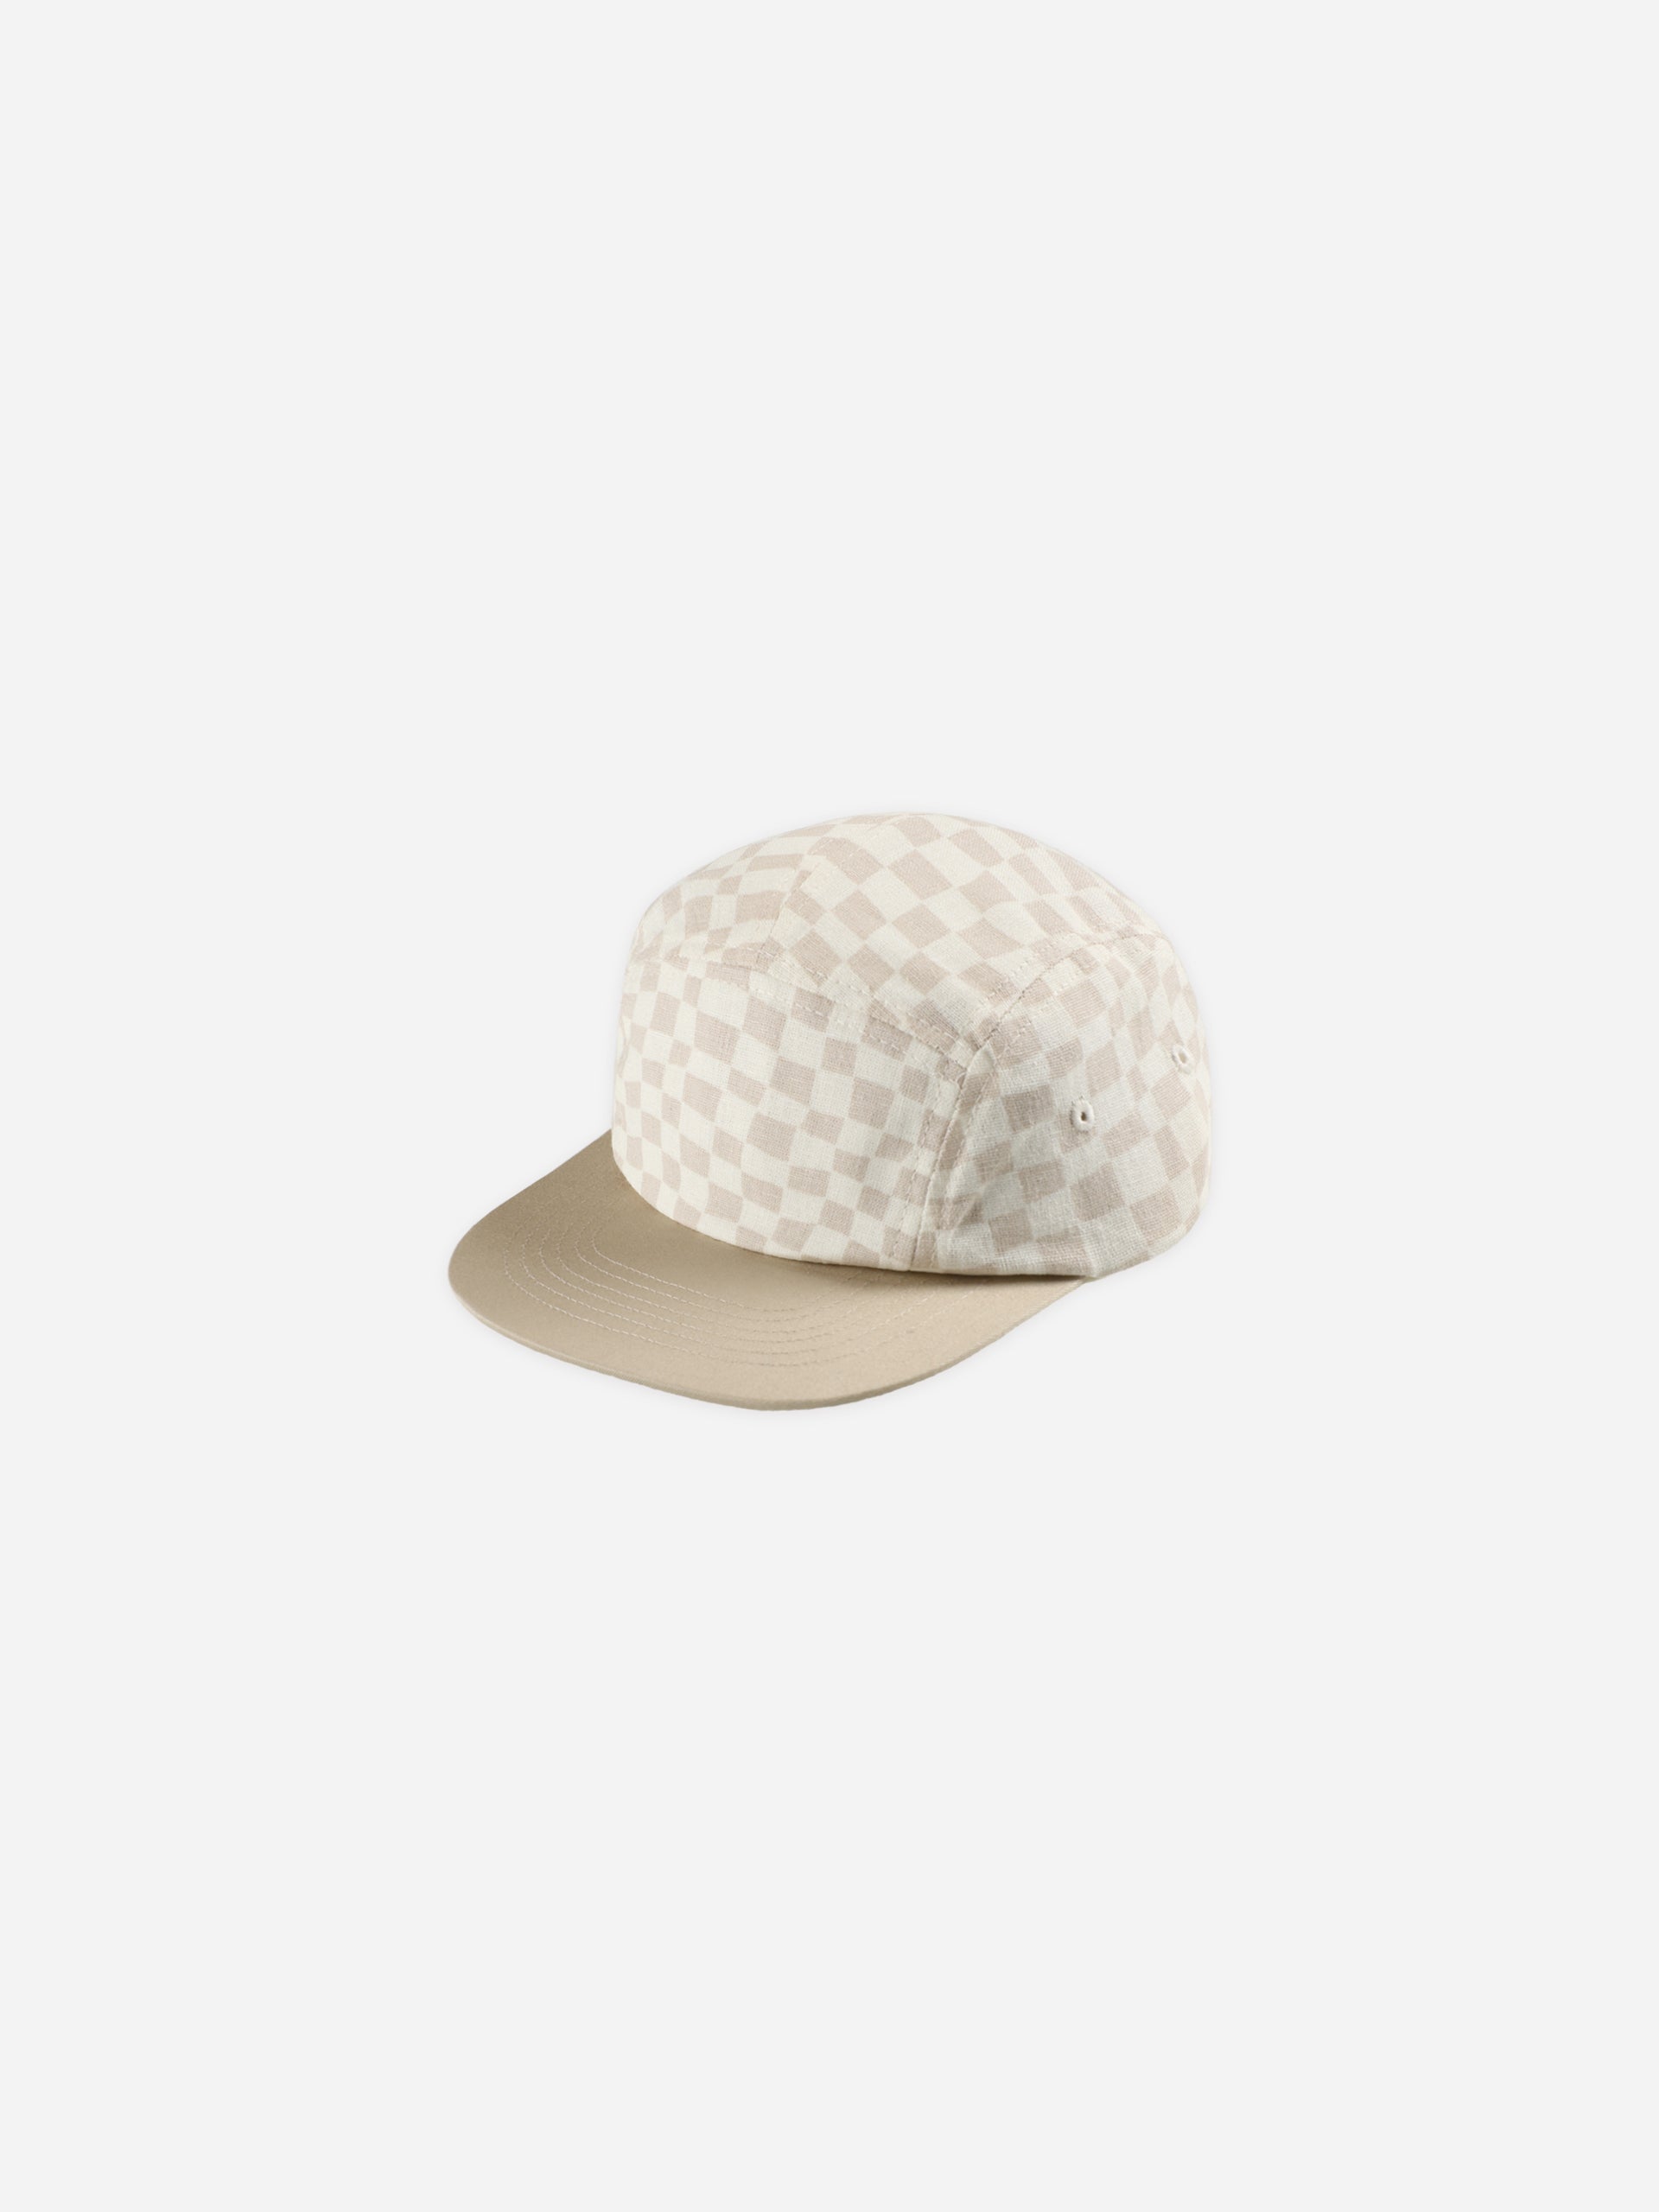 Skater Hat || Dove Check - Rylee + Cru | Kids Clothes | Trendy Baby Clothes | Modern Infant Outfits |